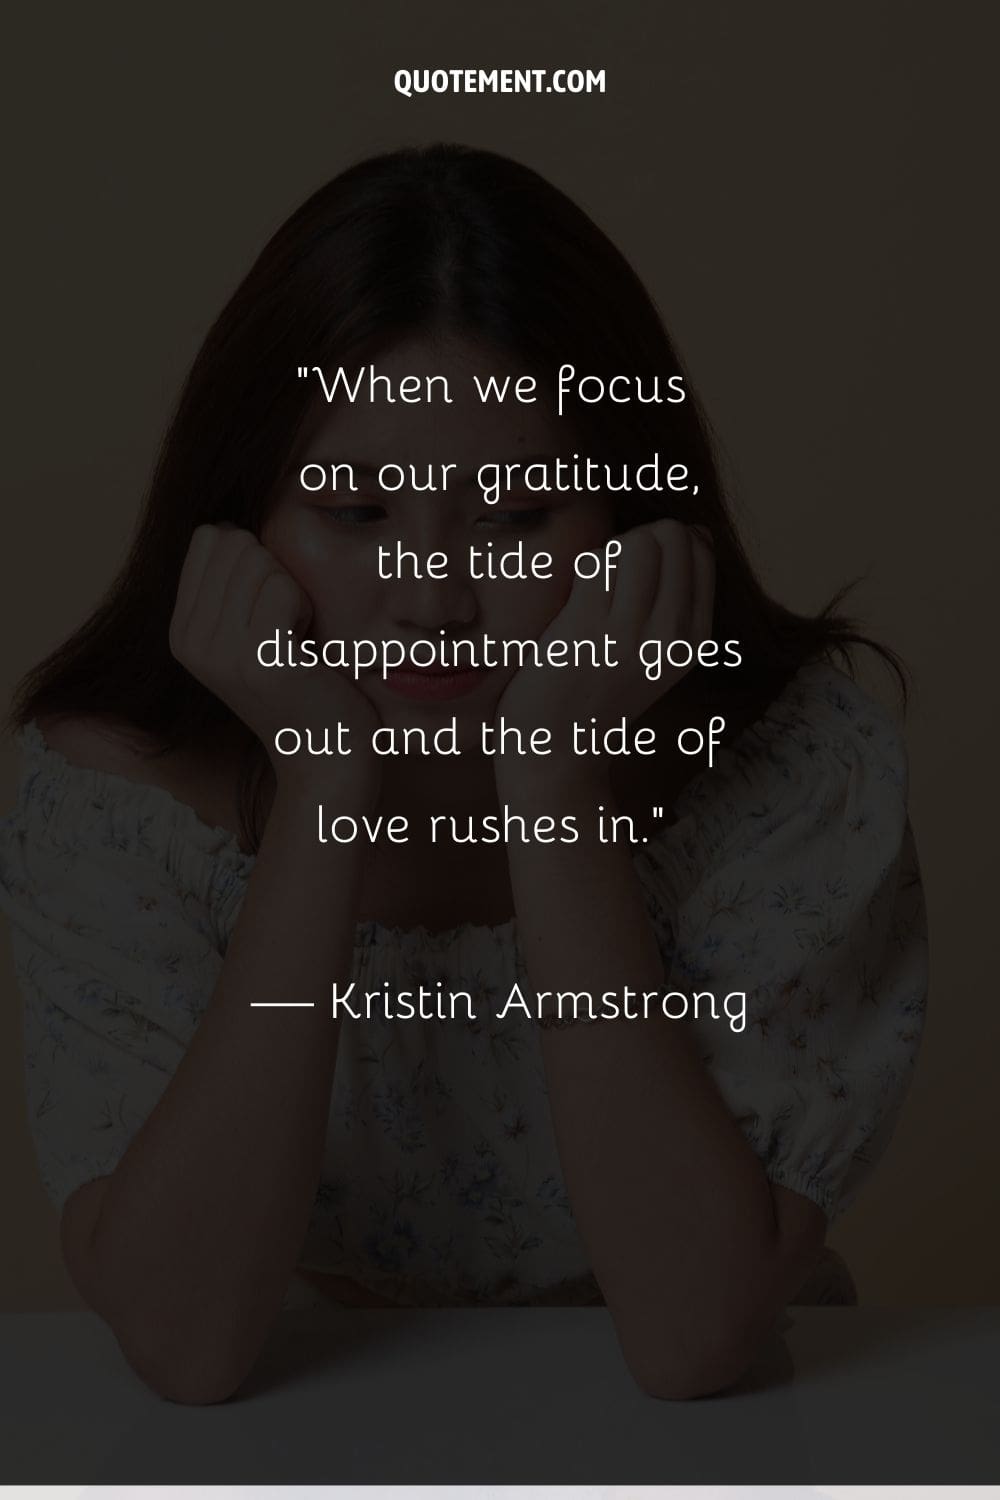 When we focus on our gratitude, the tide of disappointment goes out and the tide of love rushes in